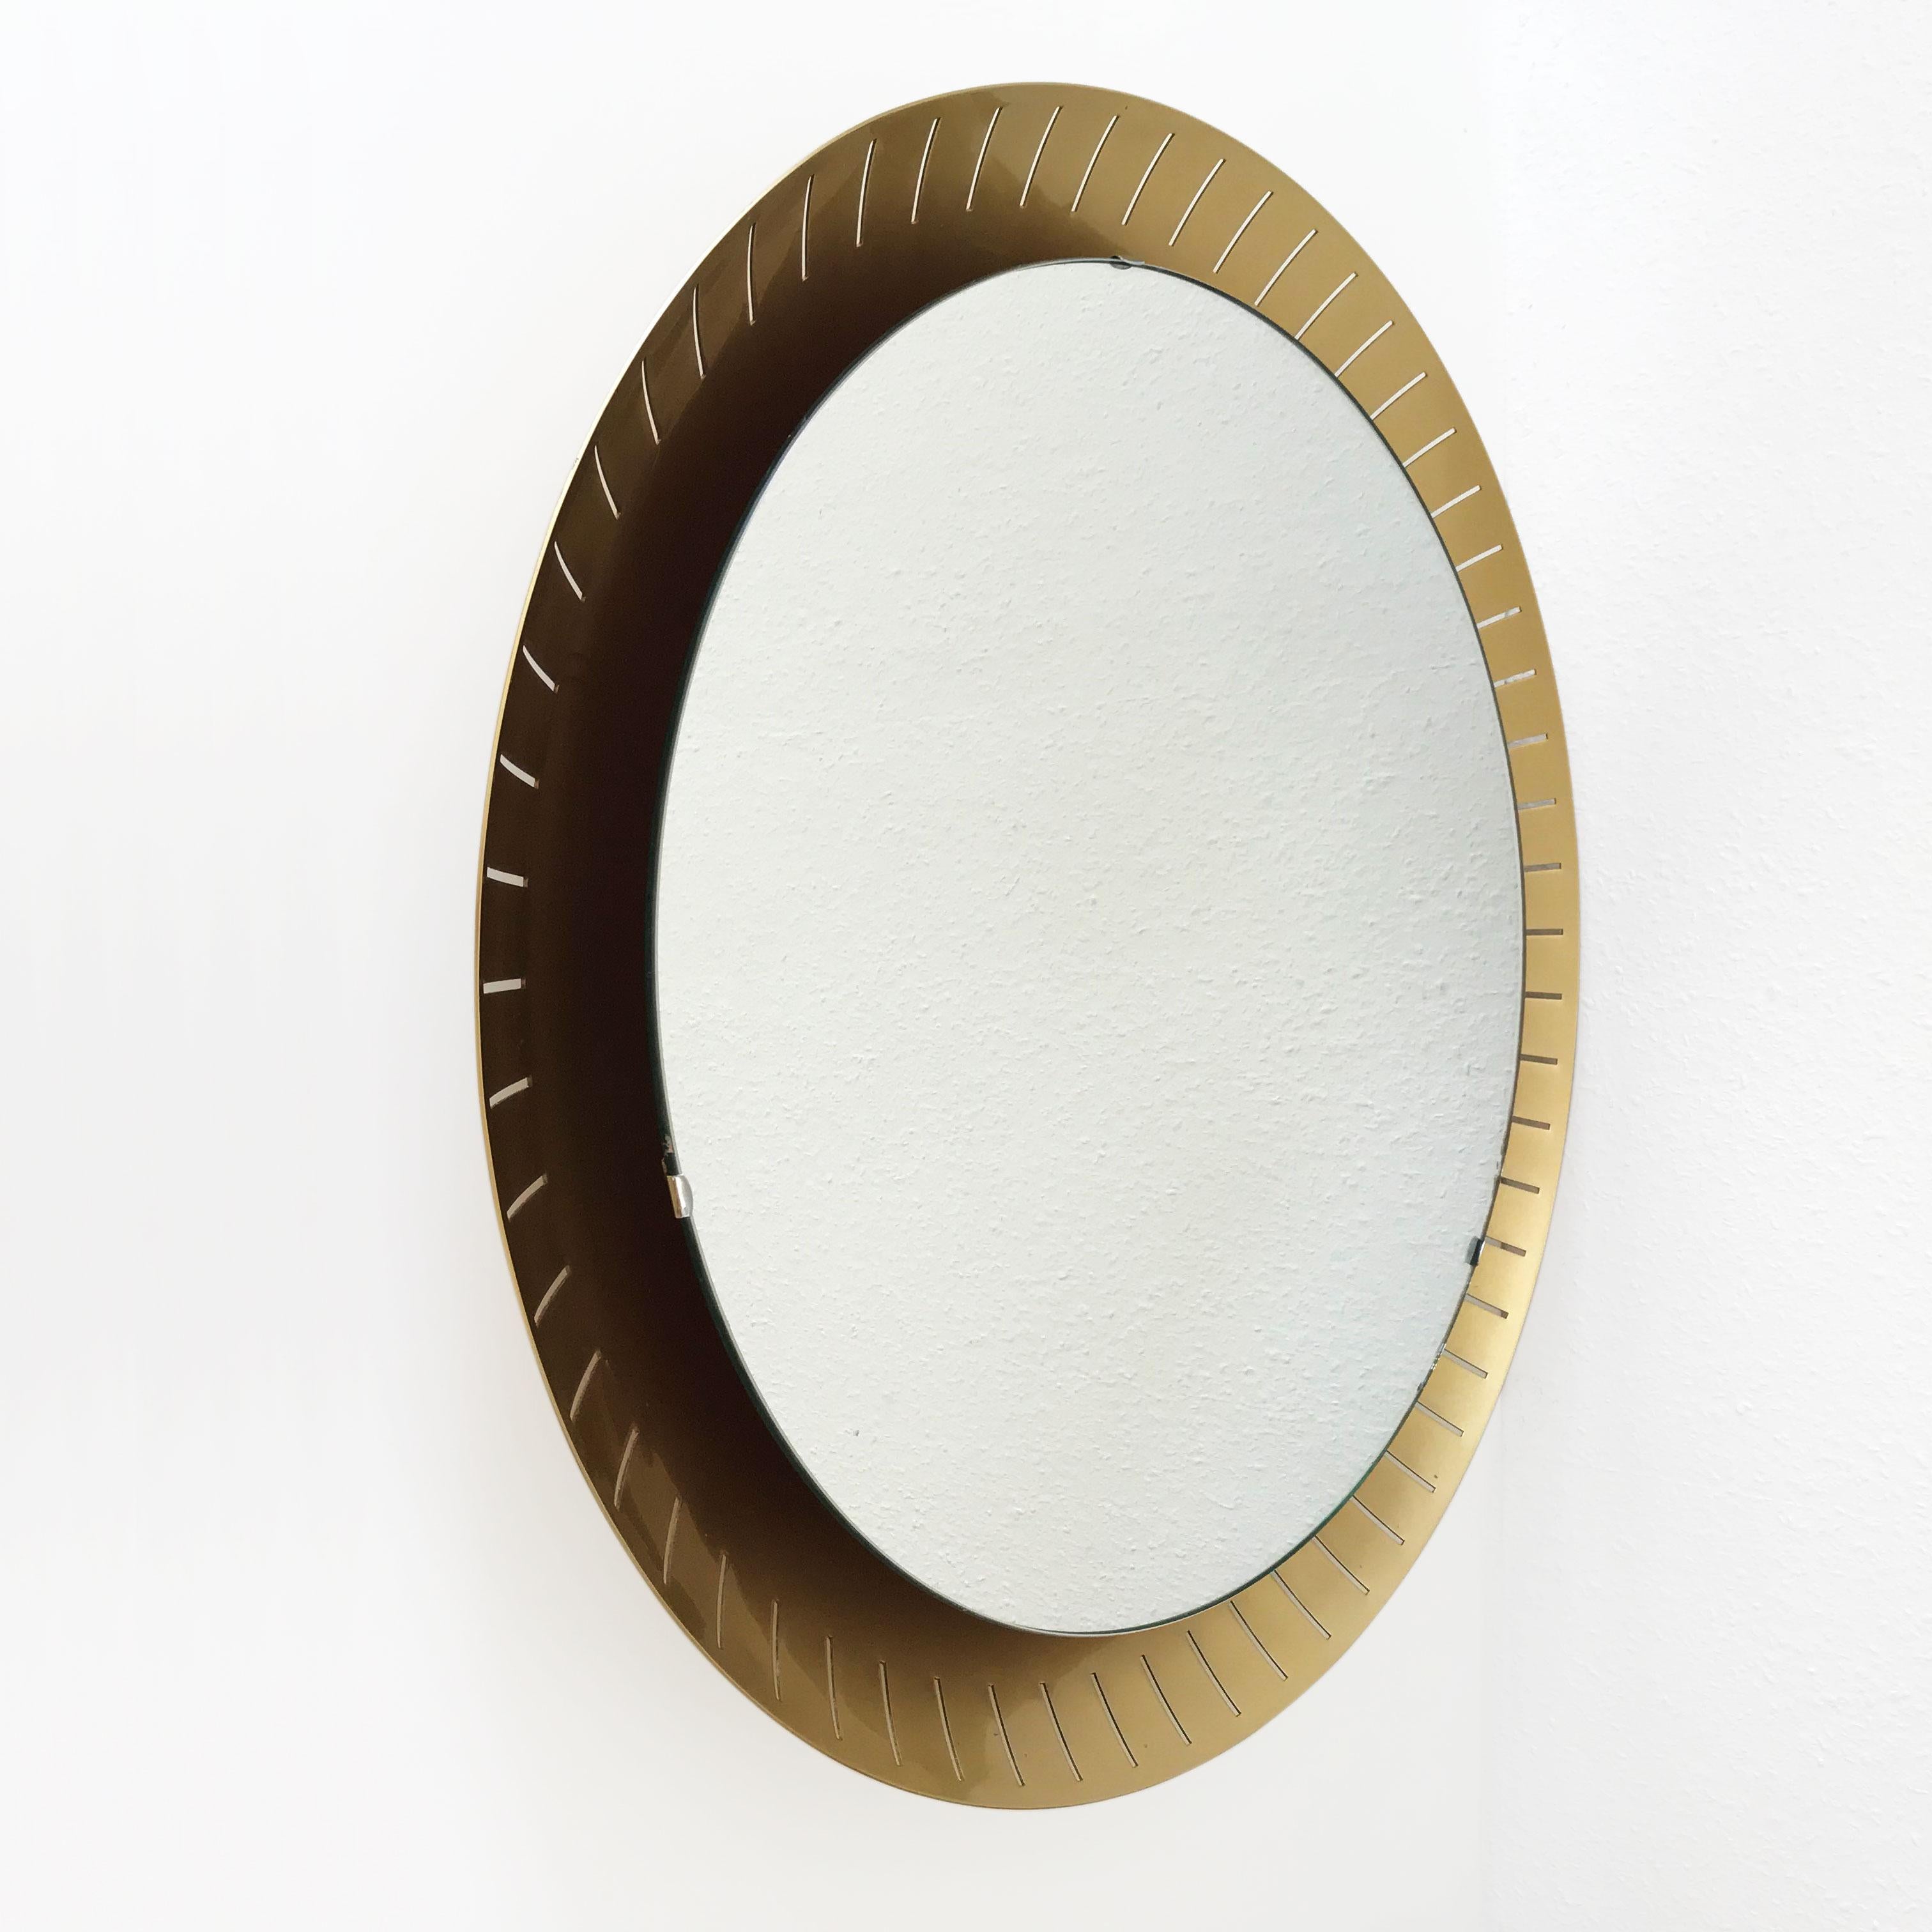 Large Mid-Century Modern Backlit Wall Mirror by Hillebrand, 1950s, Germany For Sale 3